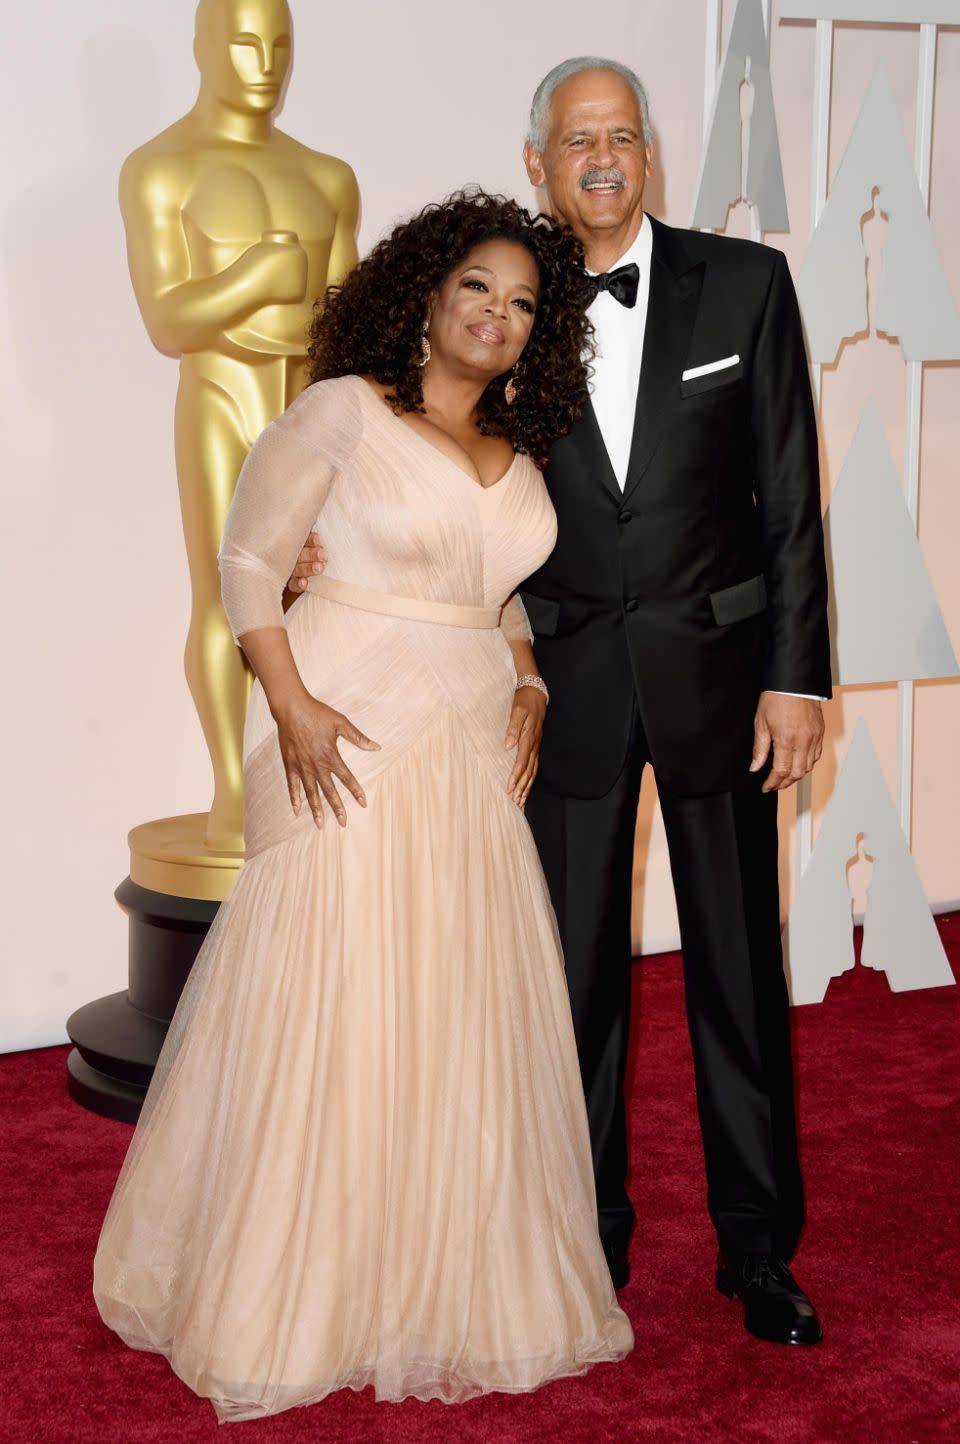 Apparently part of the reason the pair chose to wed is Oprah's potential bid for president in 2020. The pair are pictured here together at the 2015 Oscars. Source: Getty